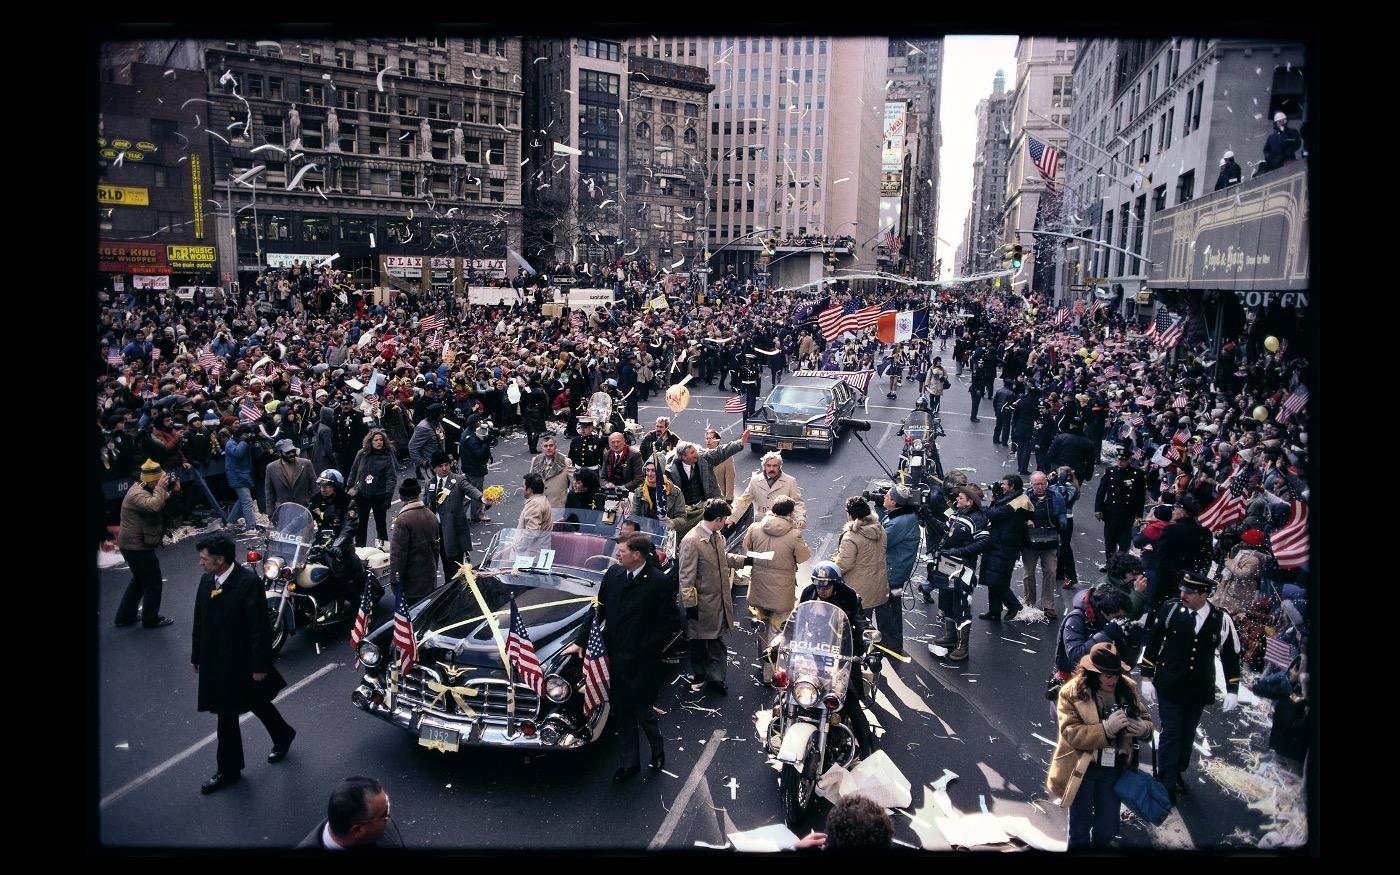 Following 444 days of captivity, the returned American Hostages have a ticker tape parade in New York  1981 : Looking Back: 60 Years of Photographs : David Burnett | Photographer